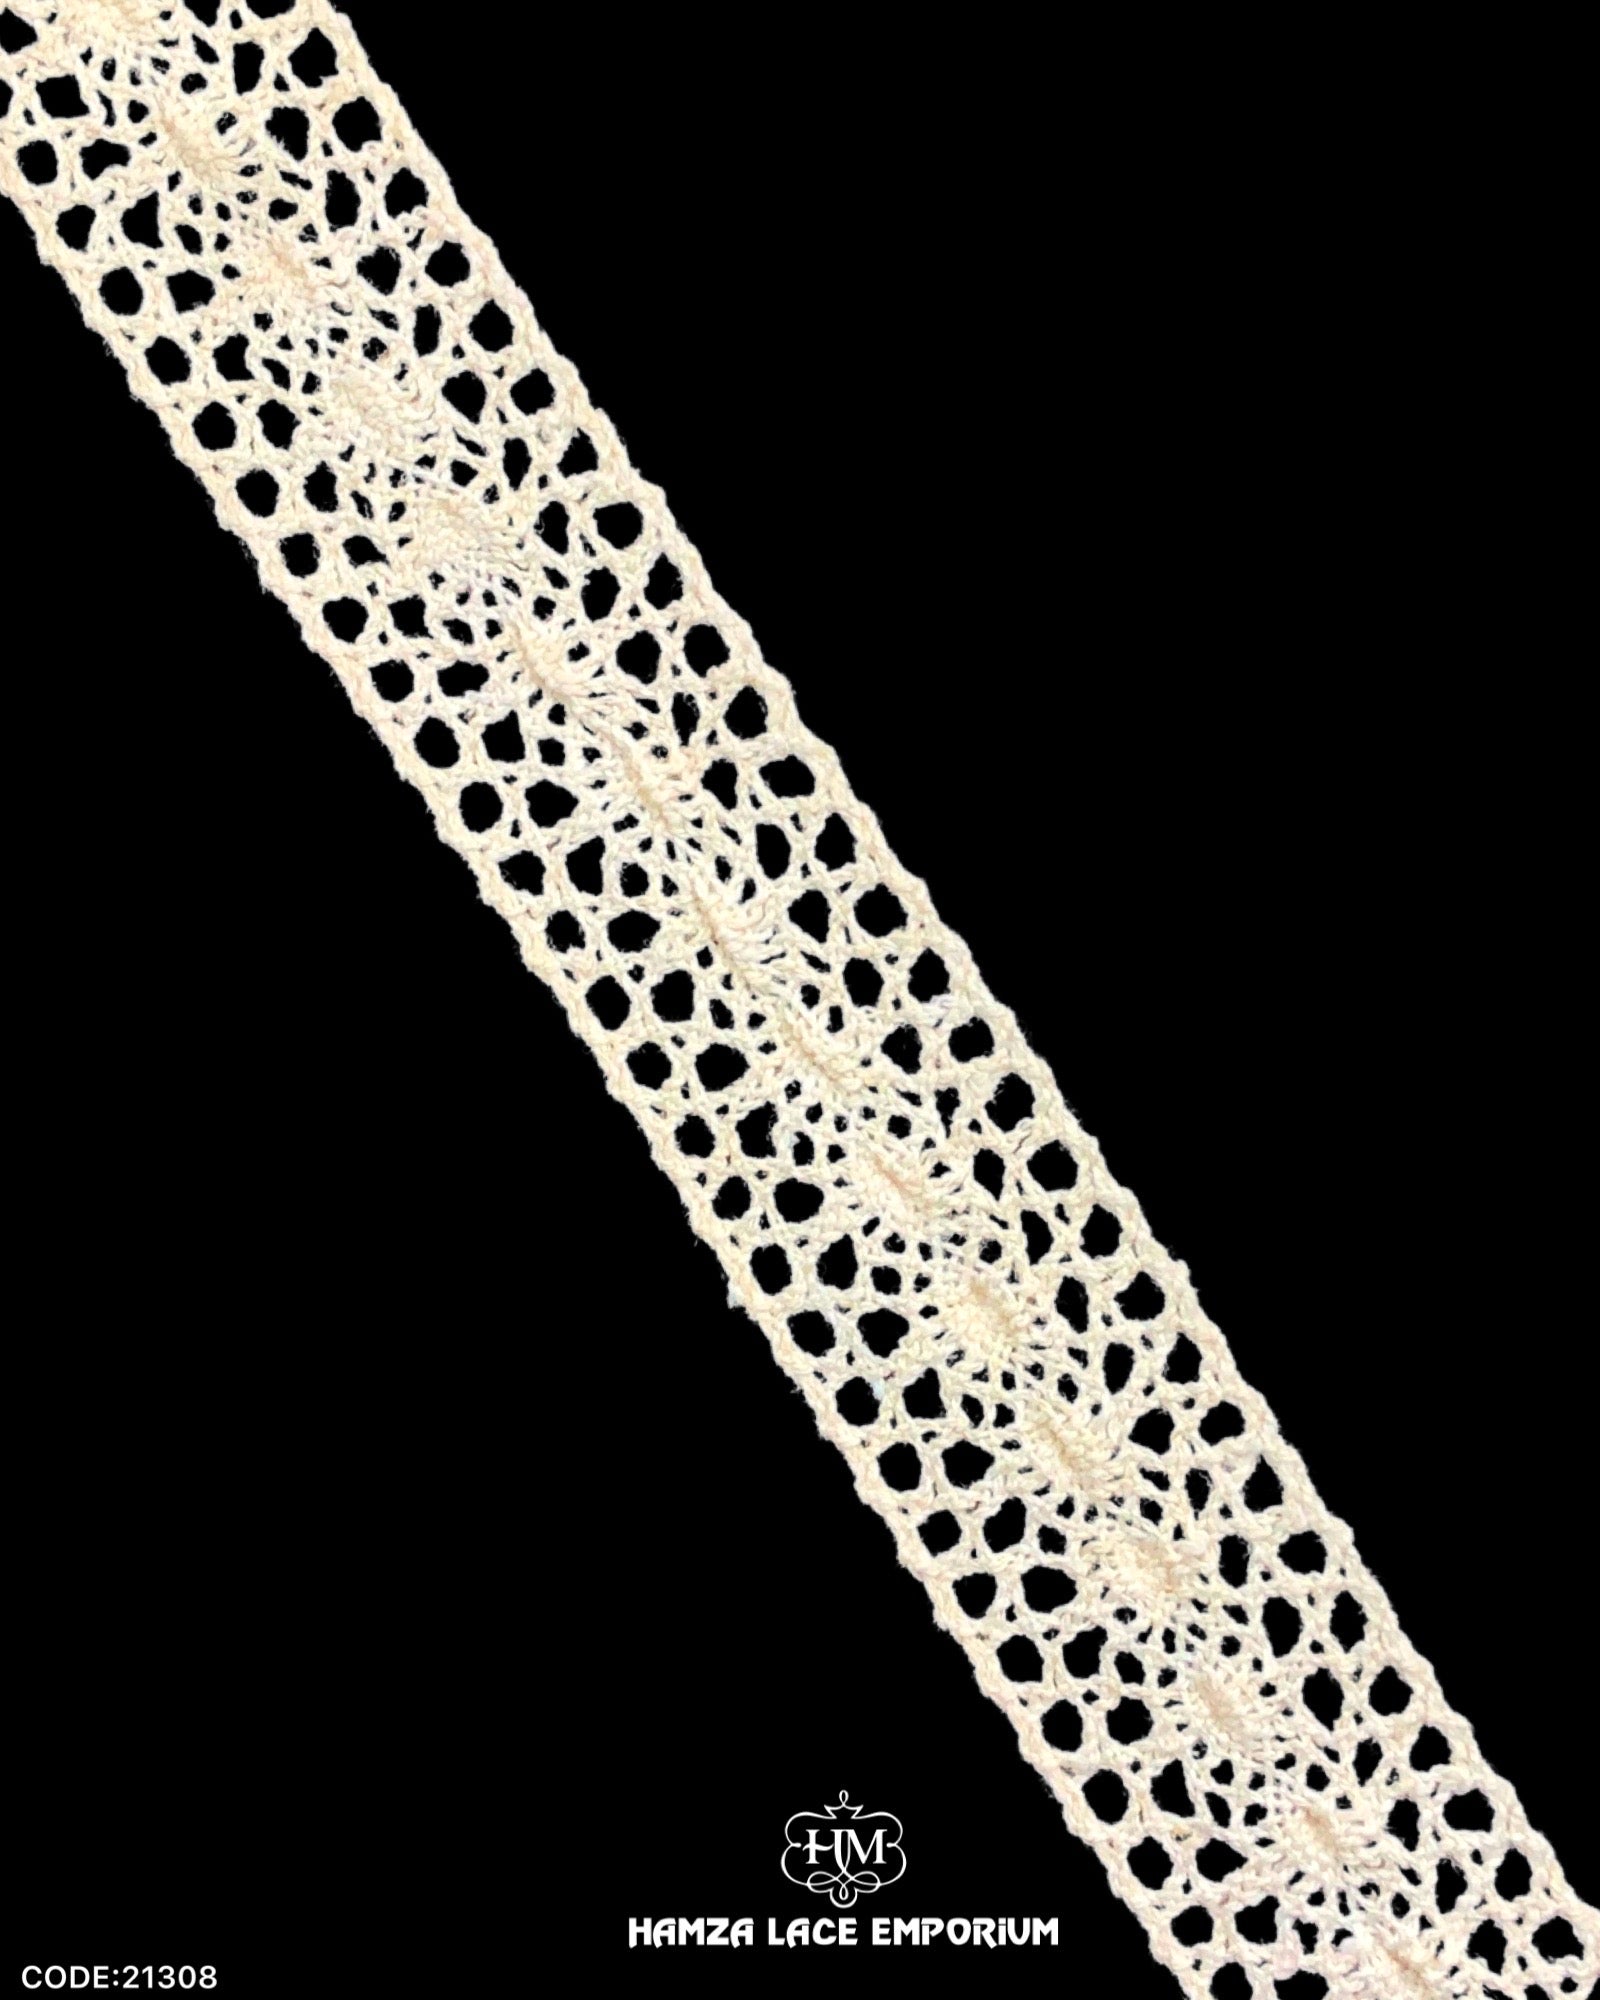 'Center Crochet Filling Lace 21308' with the brand name 'Hamza Lace' written at the bottom